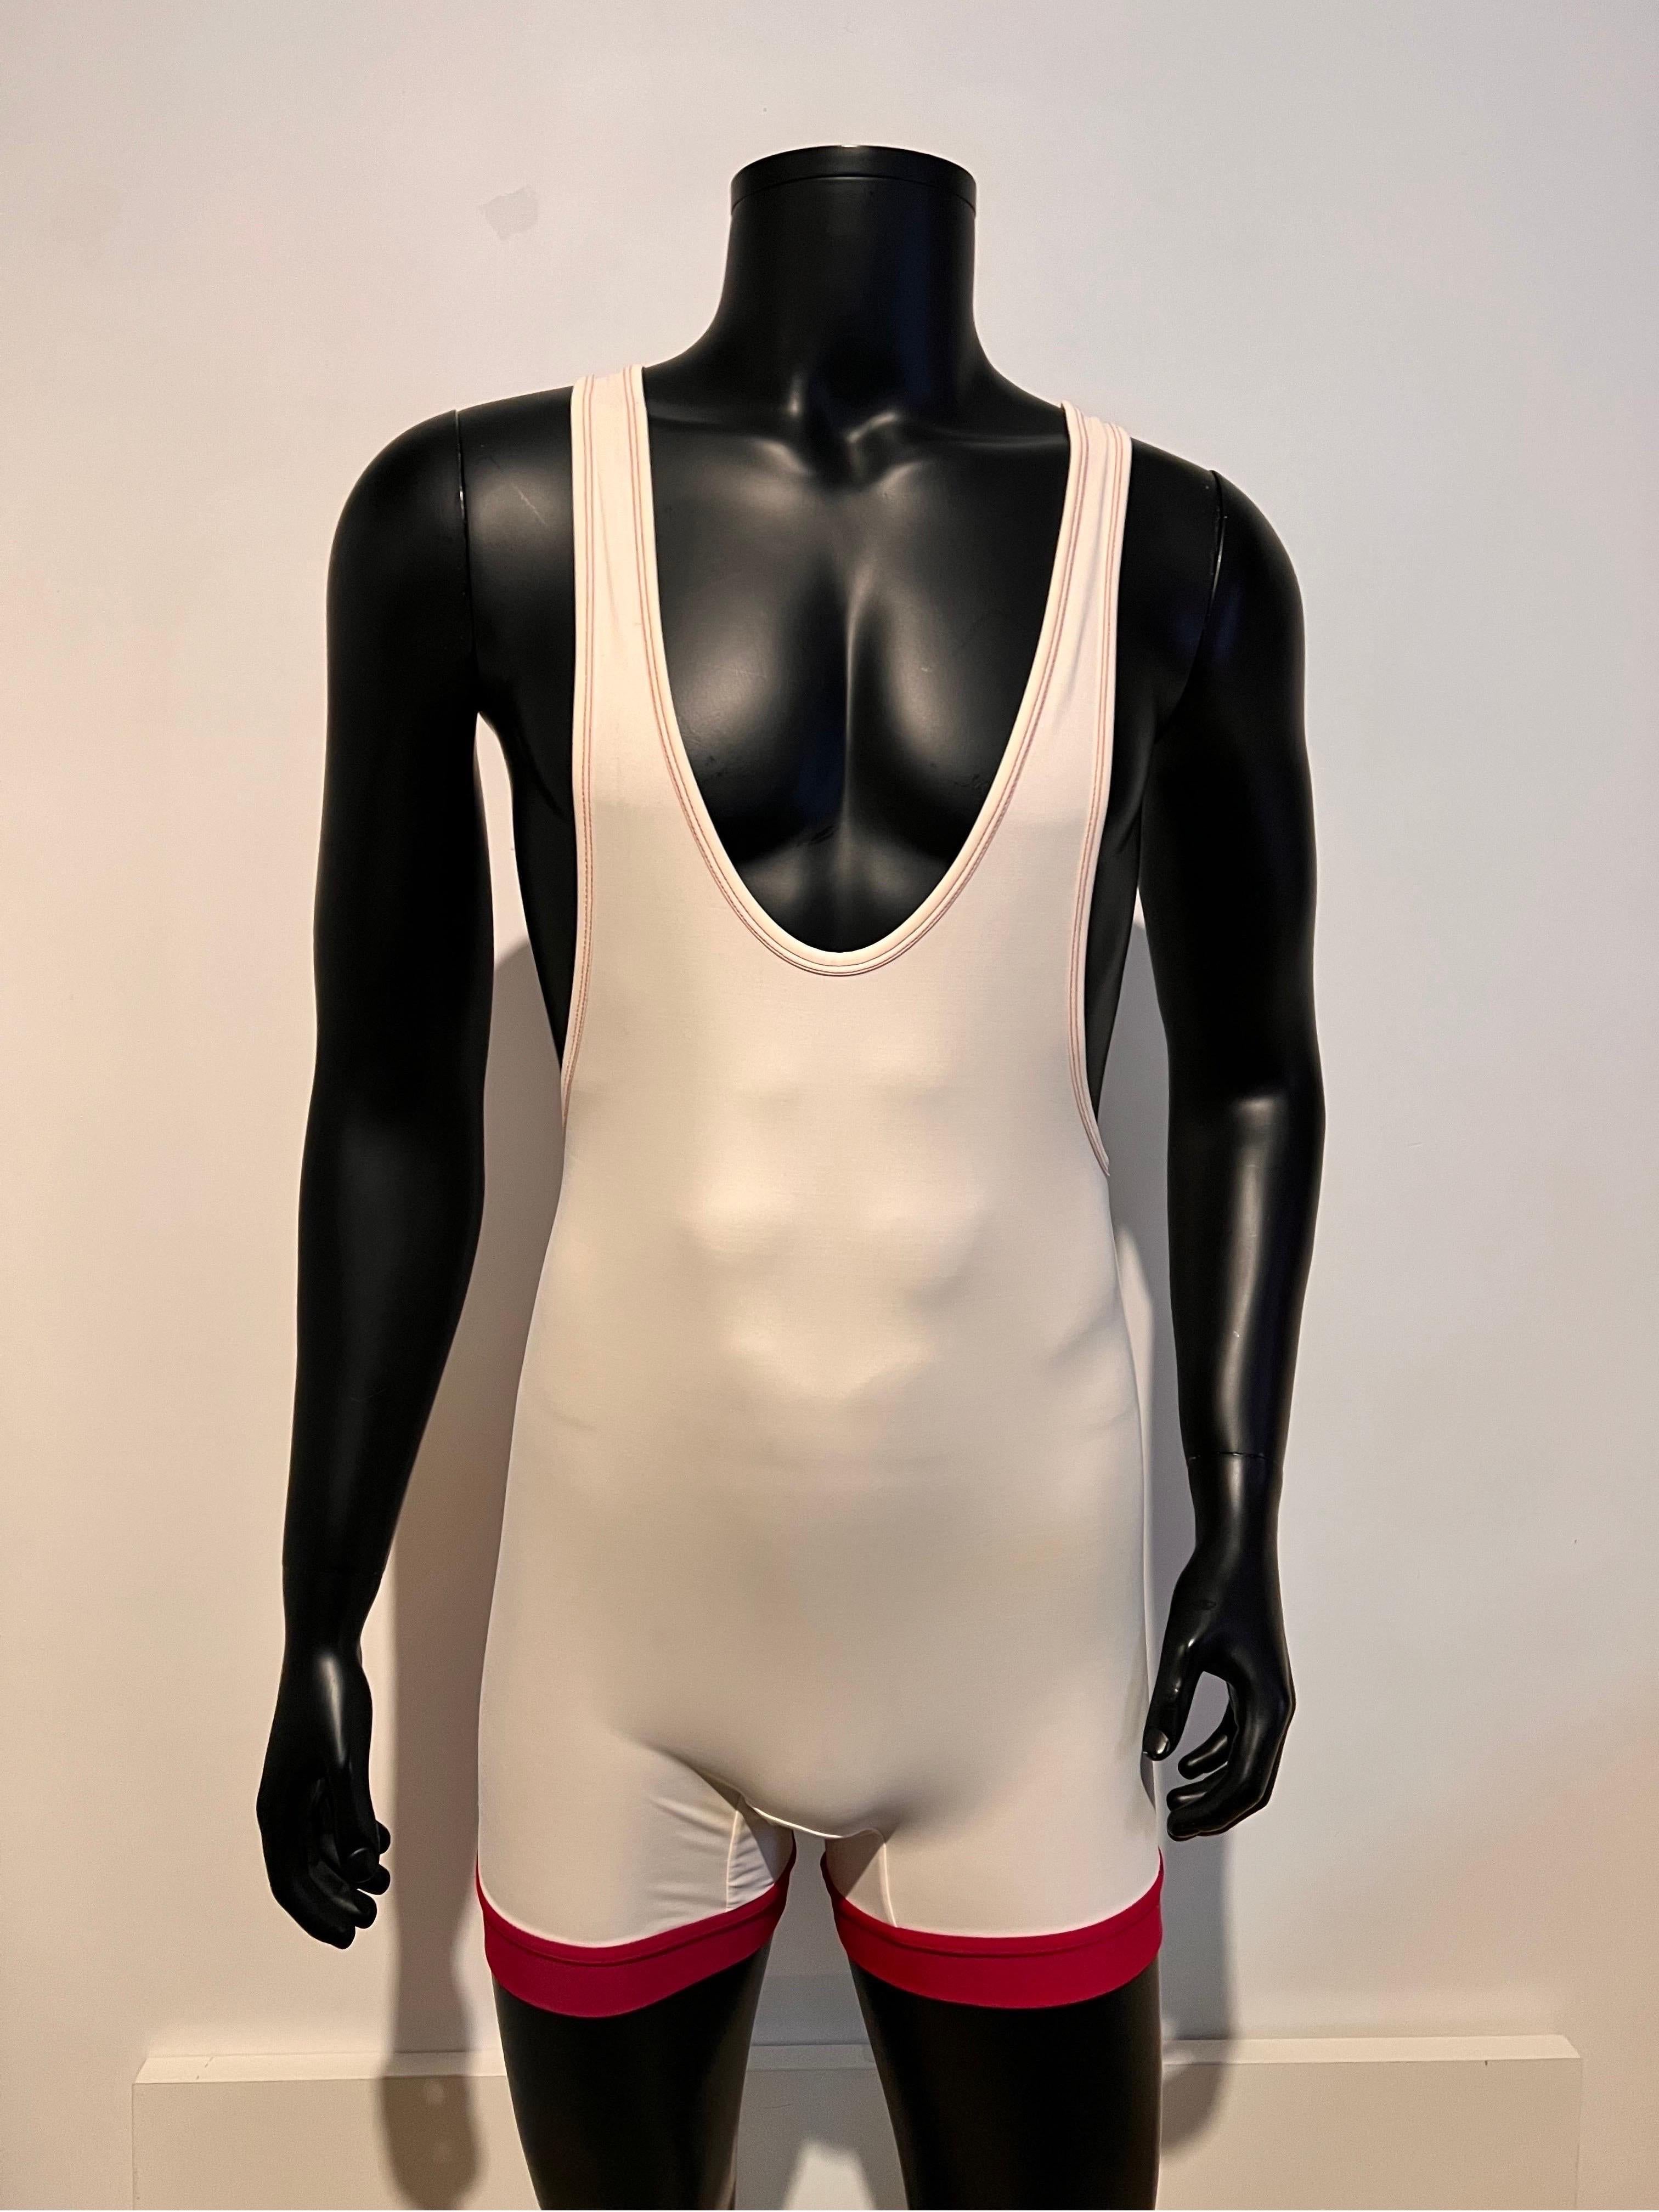 Amazing and unique Y2K EMPORIO ARMANI Men's One Piece Swimsuit.

Especially made for the runway, then sent into production for a limited run

Could be genderless 

Size Mens Small 

In good condition